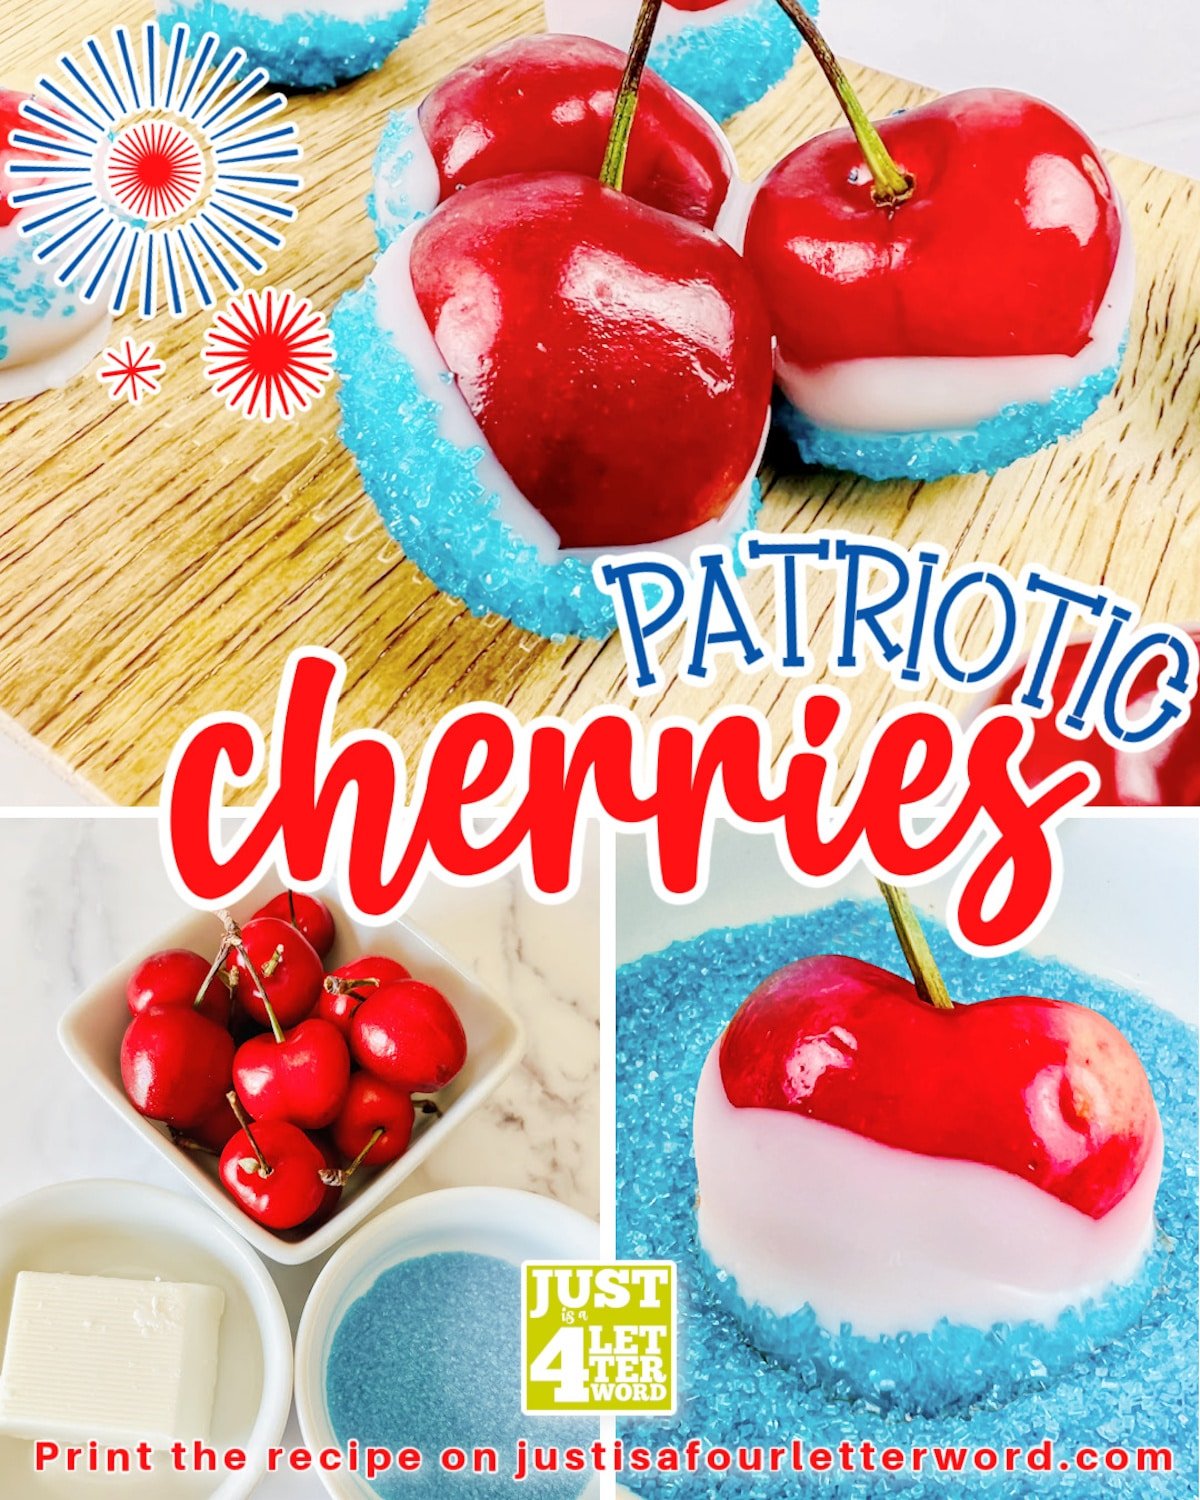 images of cherries dipped in white chocolate and blue sugar sprinkles with text patriotic cherries and an ingredient image of cherries, white chocolate and sprinkles in bowls